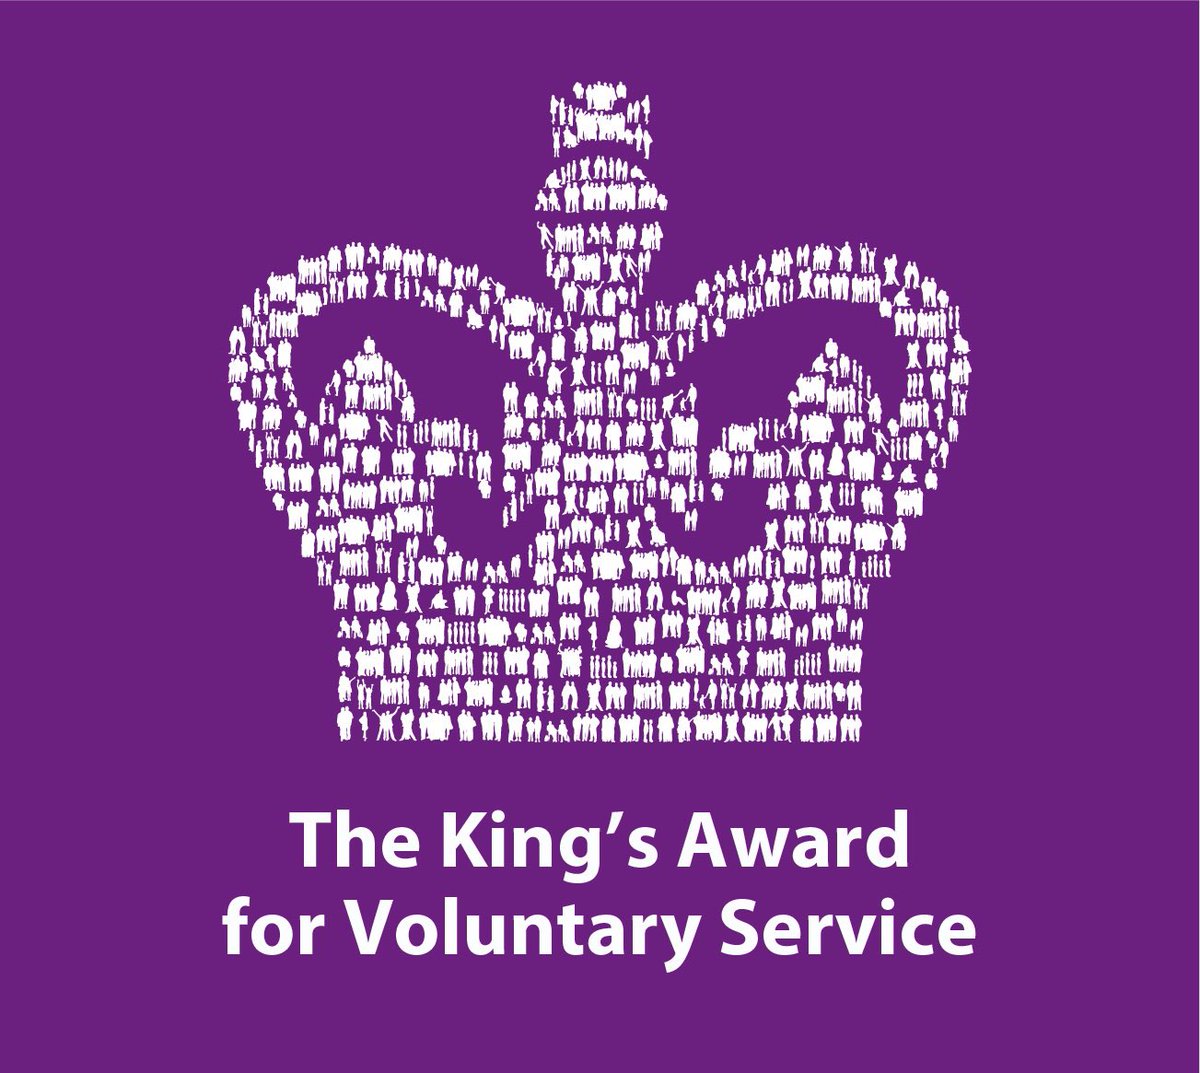 We are delighted that 8 Staffordshire voluntary organisations have today been awarded The King’s Award for Voluntary Service @KingsAwardVS